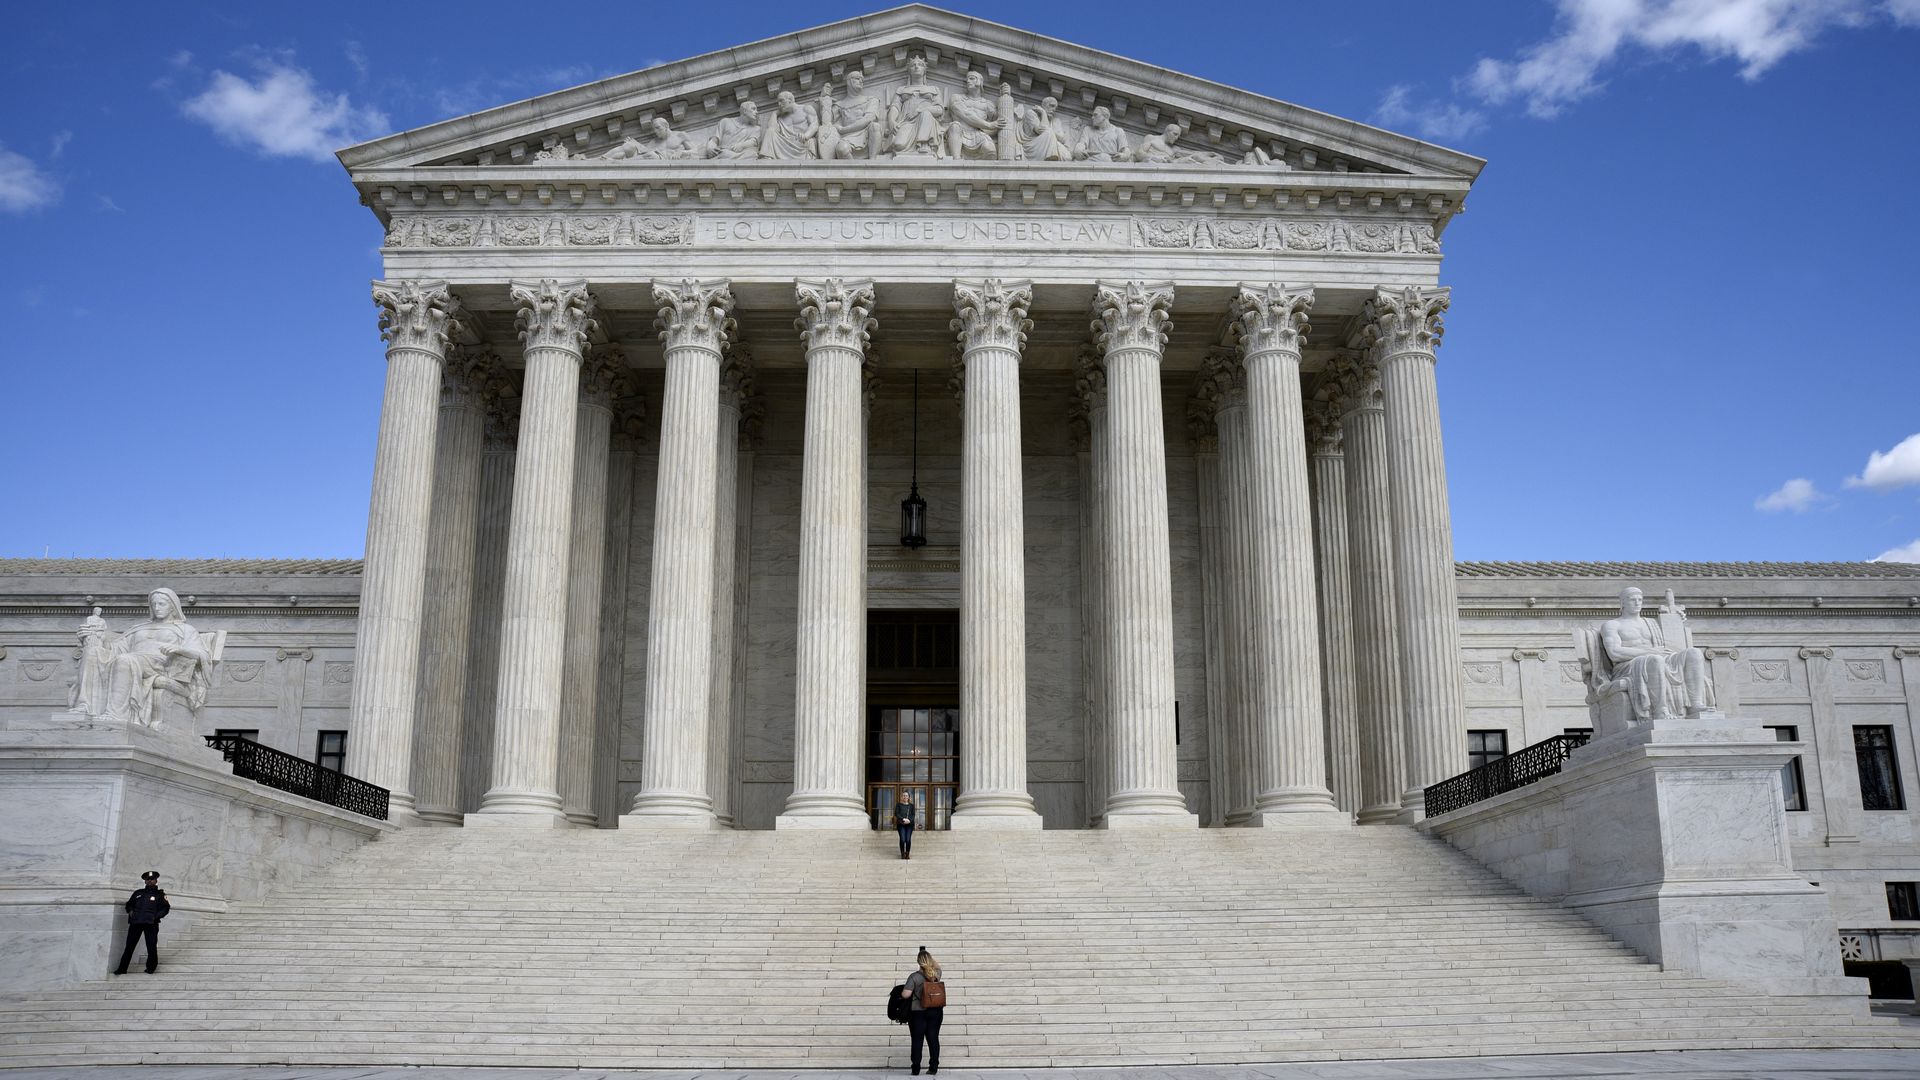 The U.S. Supreme Court Building in Washington, D.C., is the seat of the Supreme Court of the United States and the Judicial Branch of government. 